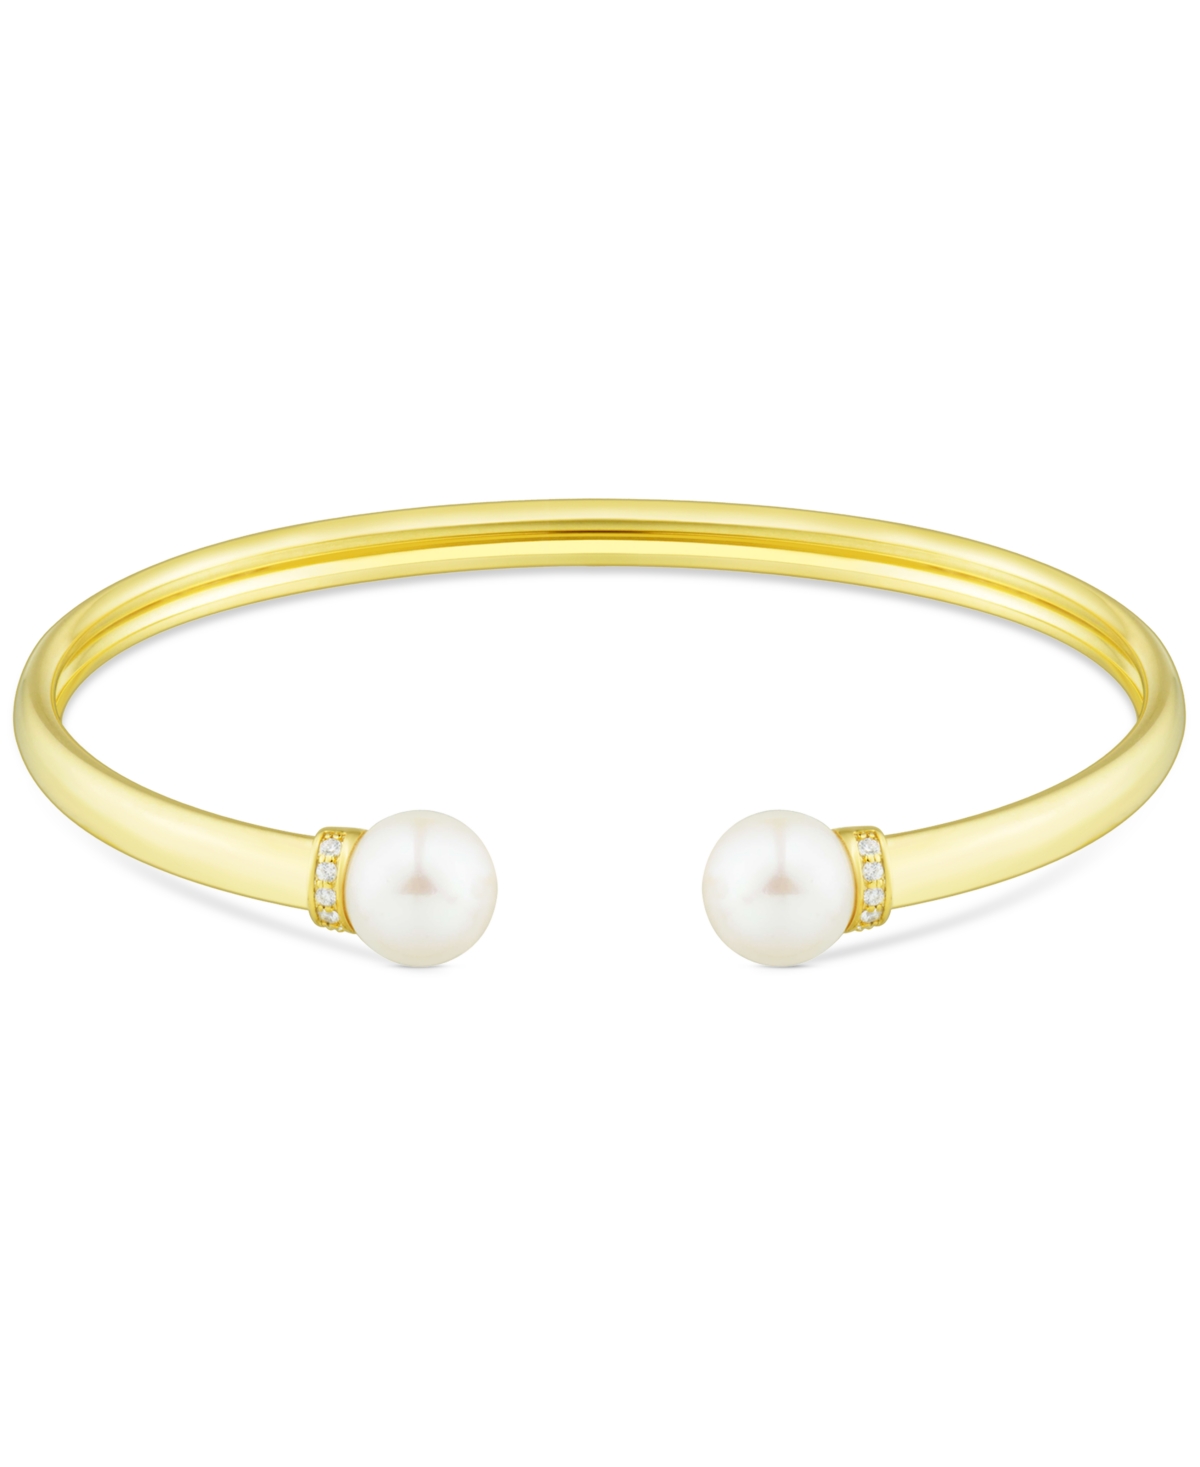 Cultured Freshwater Pearl (8mm) & Diamond (1/20 ct. t.w.) Cuff Bangle Bracelet in 14k Gold-Plated Sterling Silver - Gold